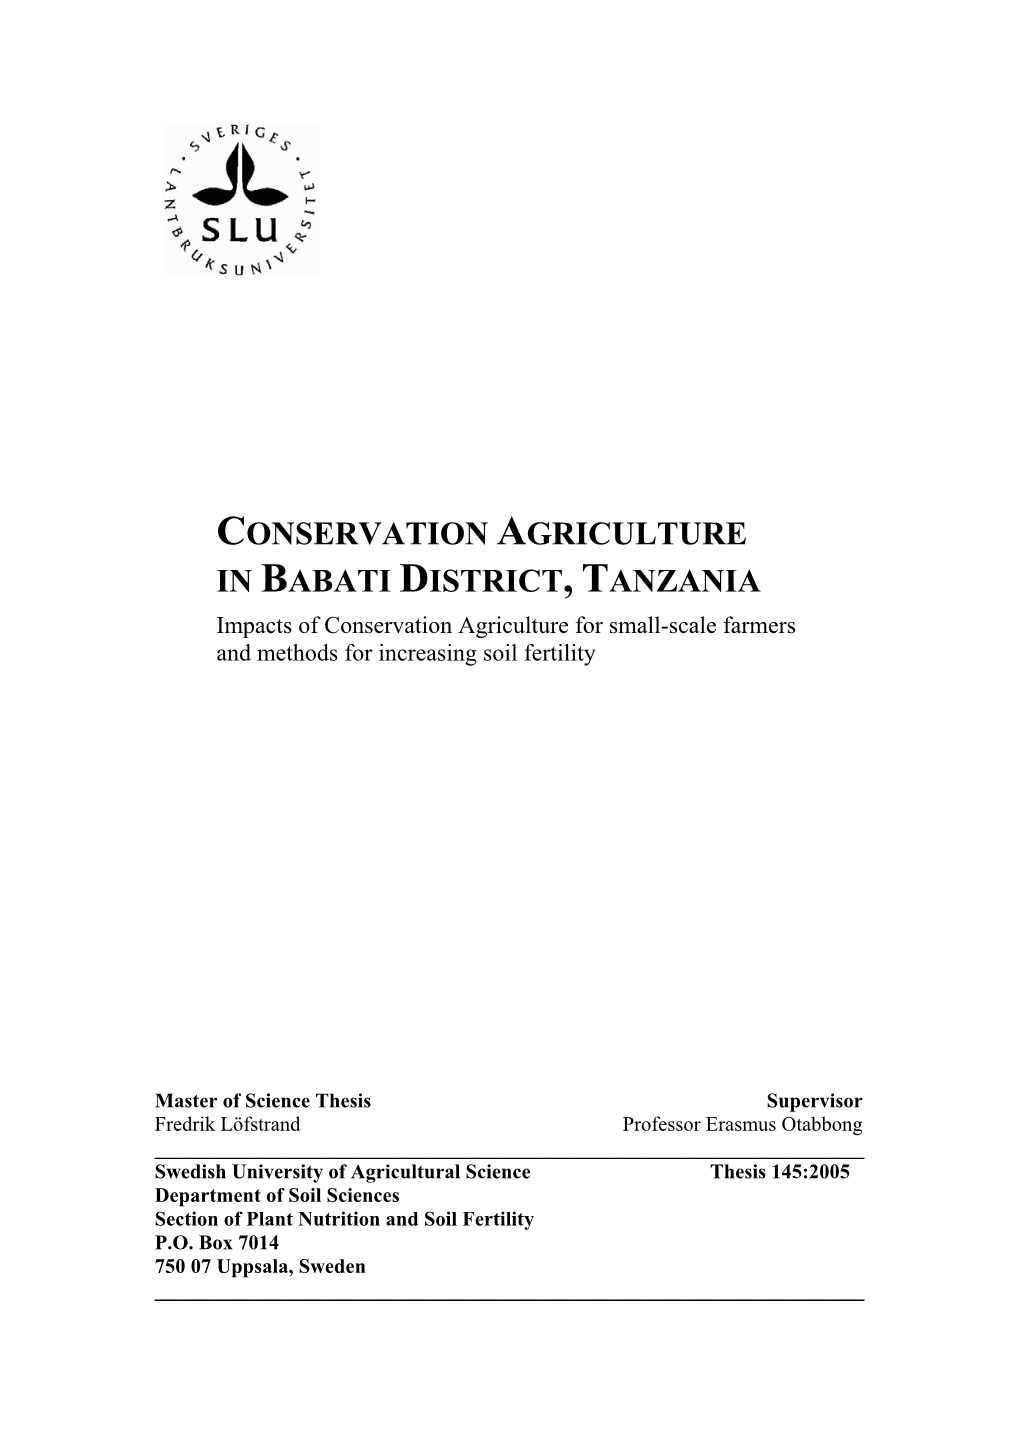 CONSERVATION AGRICULTURE in BABATI DISTRICT, TANZANIA Impacts of Conservation Agriculture for Small-Scale Farmers and Methods for Increasing Soil Fertility